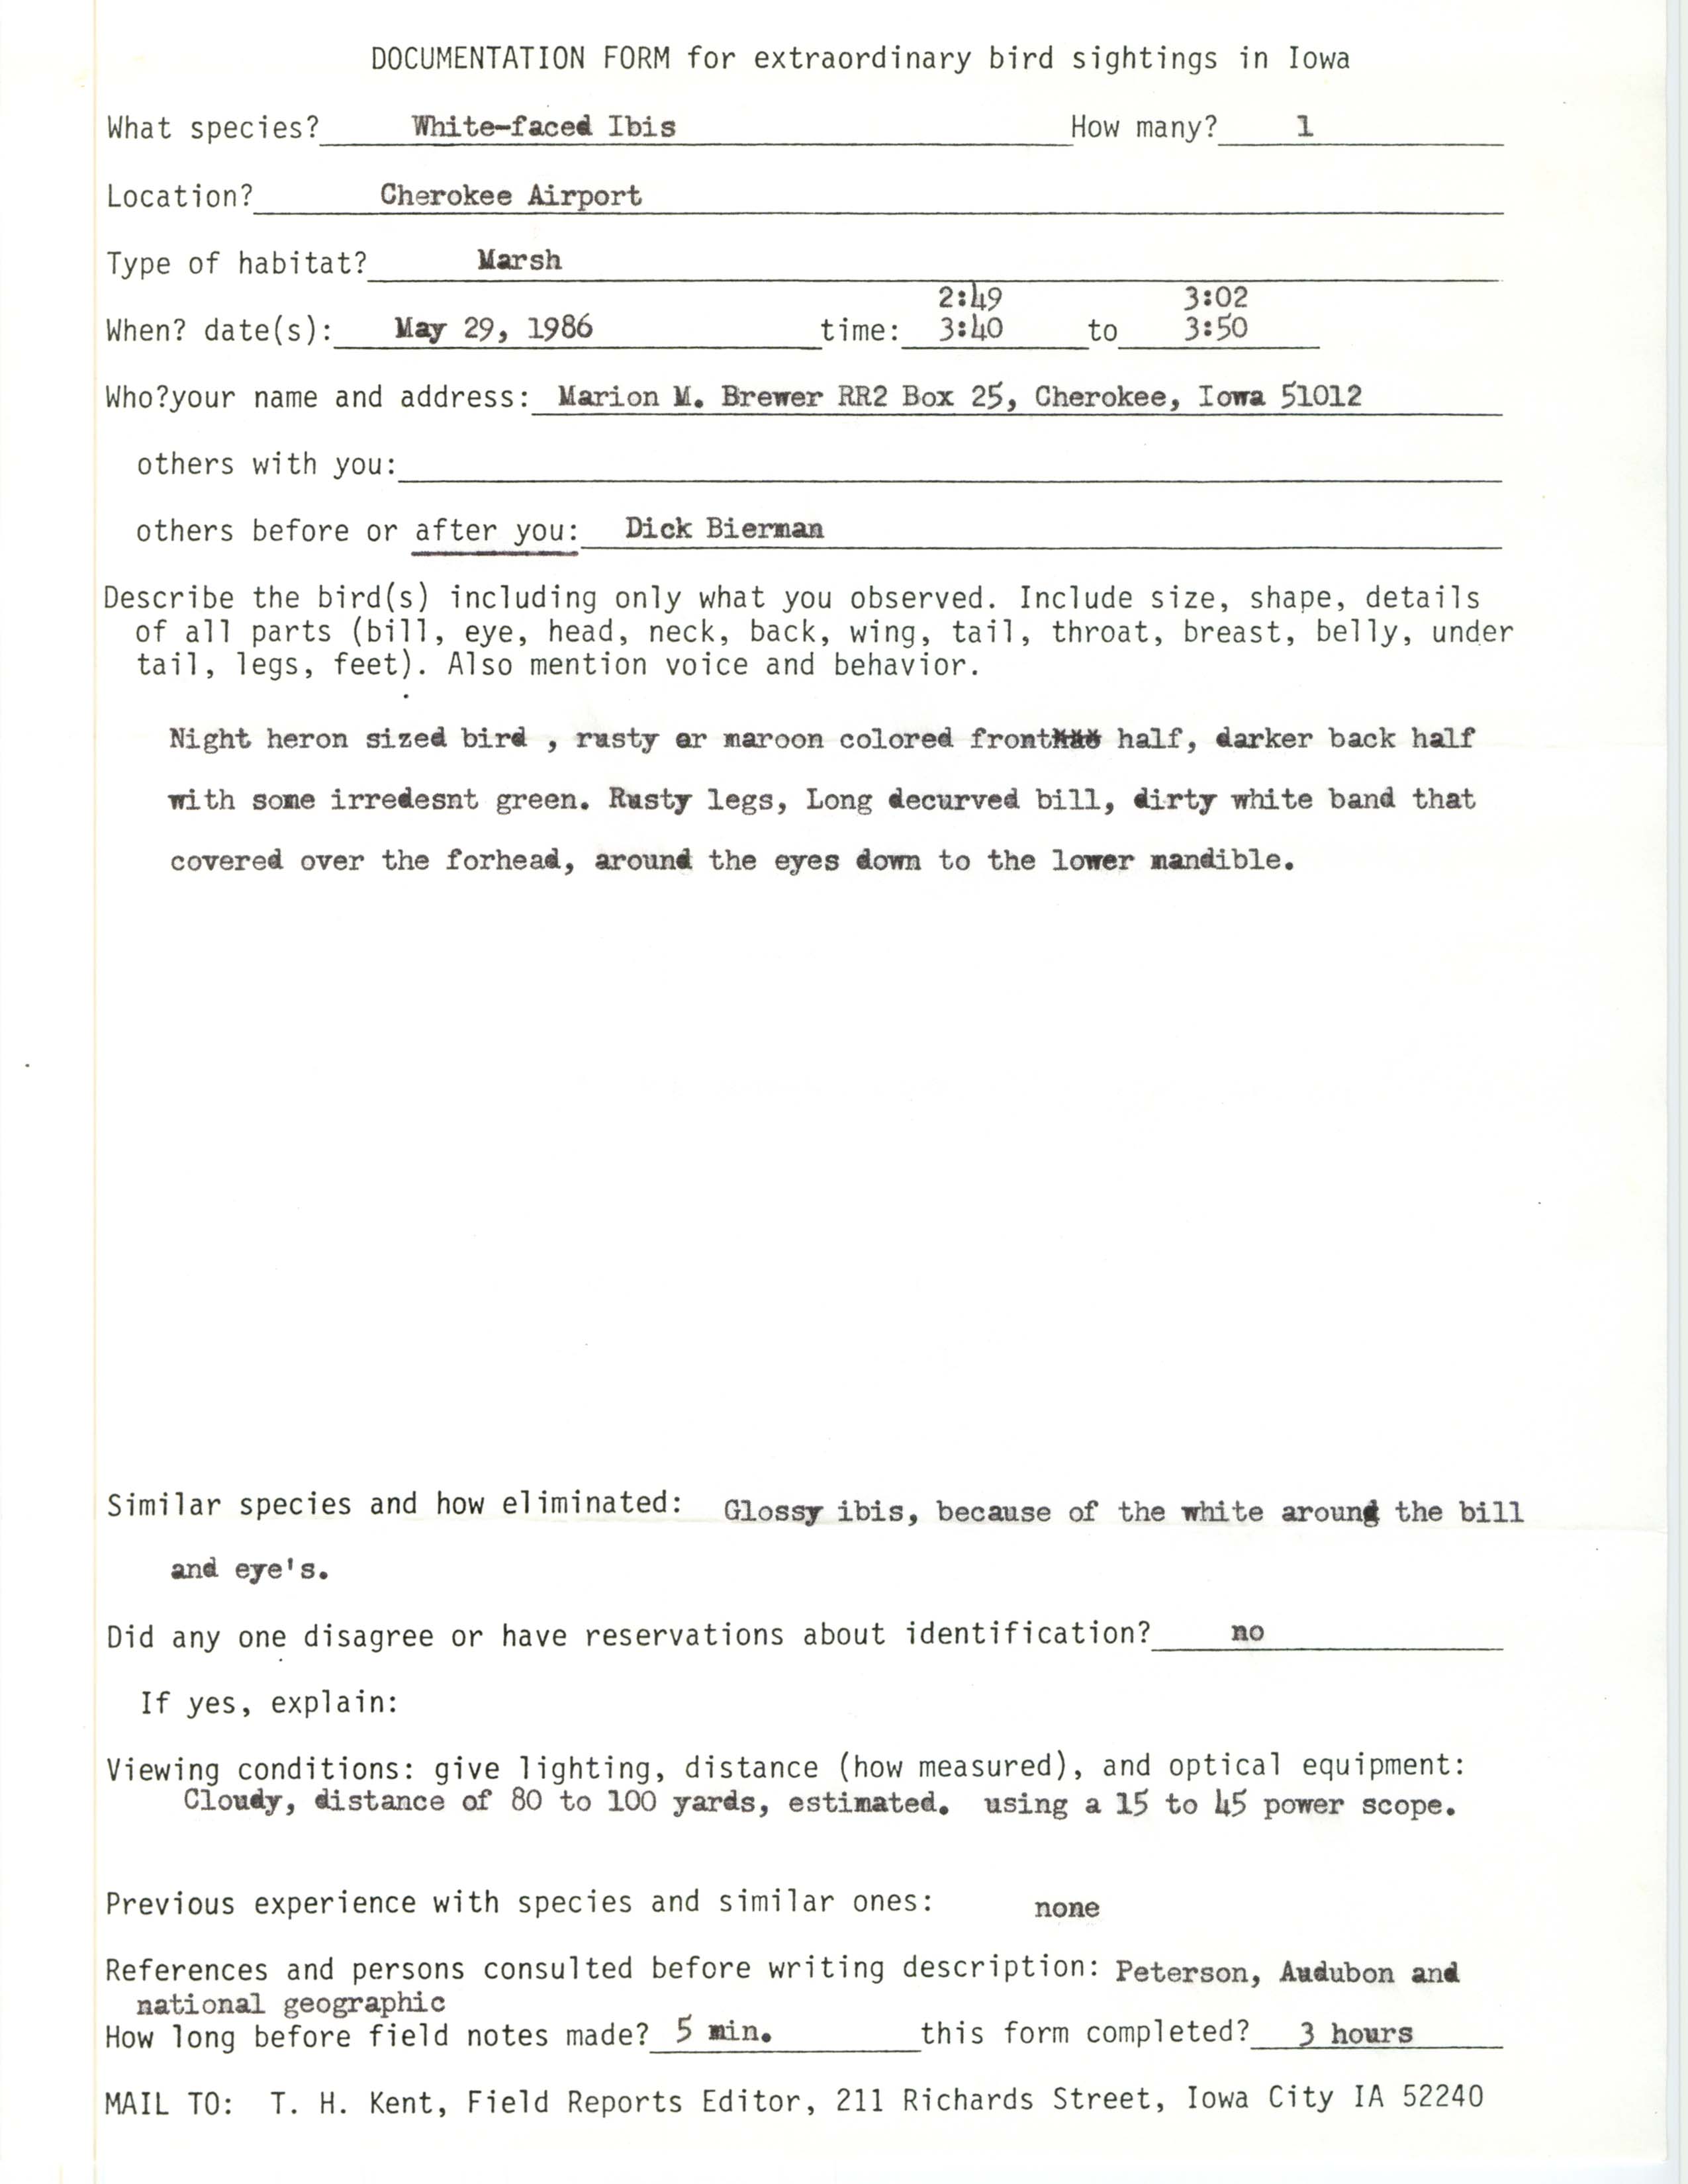 Rare bird documentation form for White-faced Ibis at Cherokee Airport, 1986